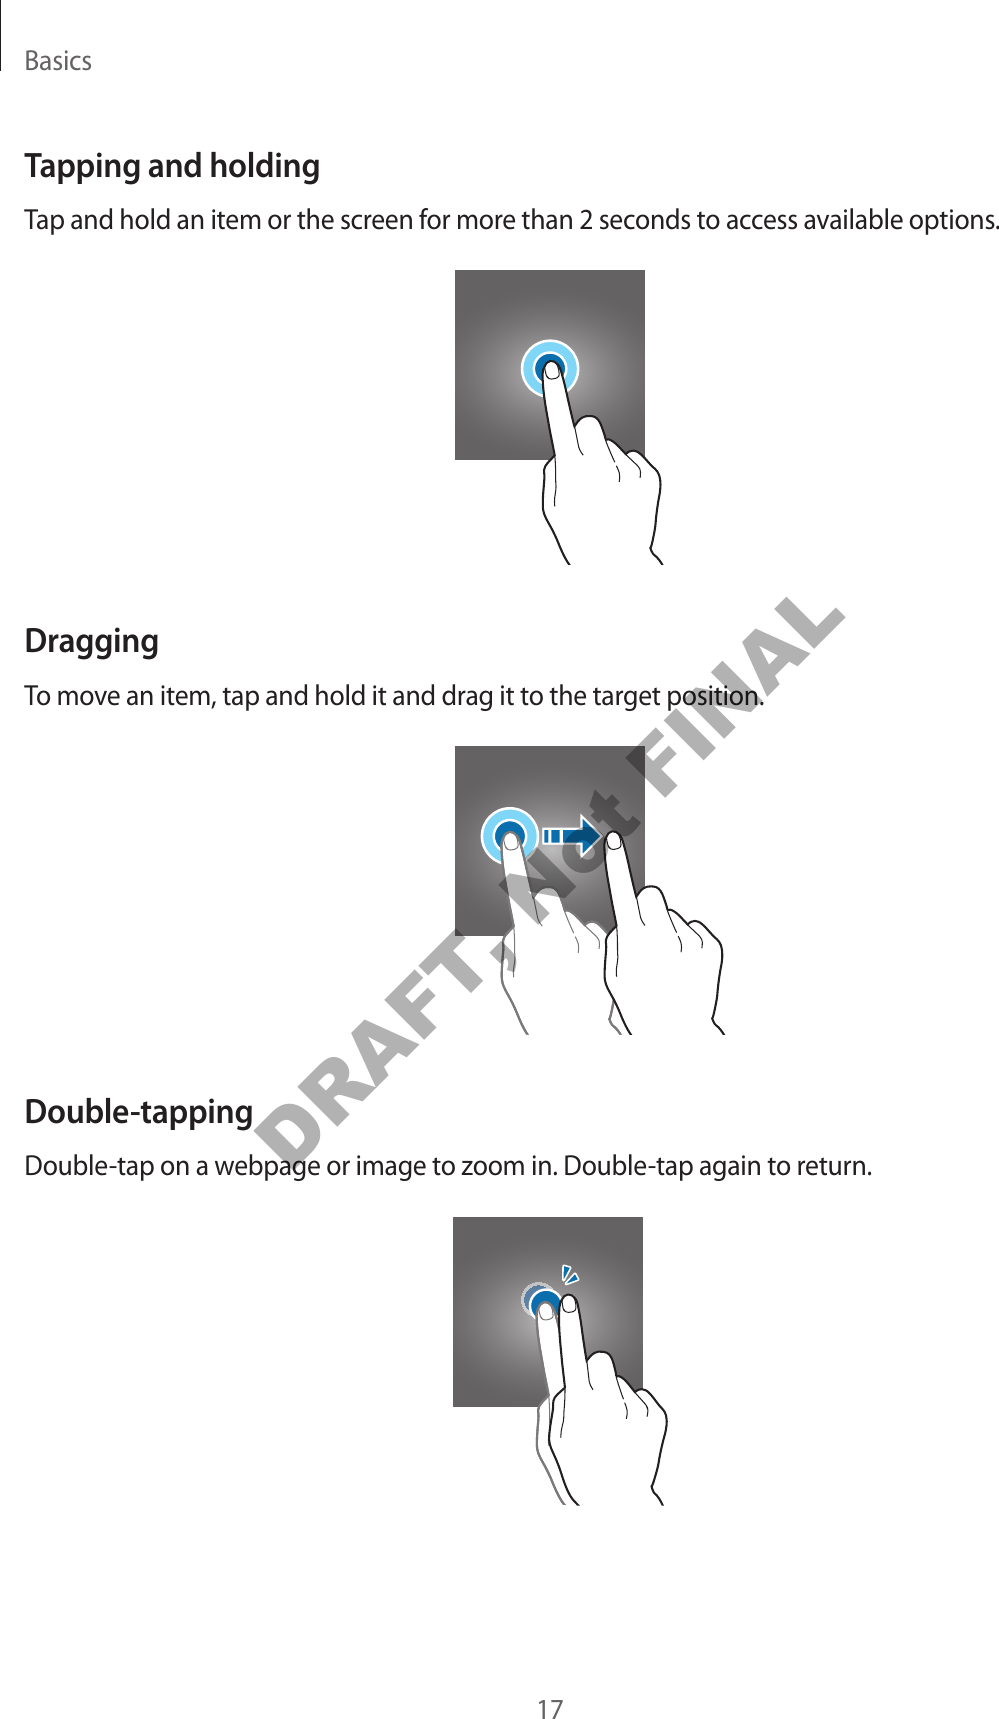 Basics17Tapping and holdingTap and hold an item or the screen f or mor e than 2 sec onds to ac cess a v ailable options .DraggingTo move an it em, tap and hold it and dr ag it to the tar get position.Double-tappingDouble-tap on a webpage or image to zoom in. Double-tap again to return.DRAFT, Not FINAL